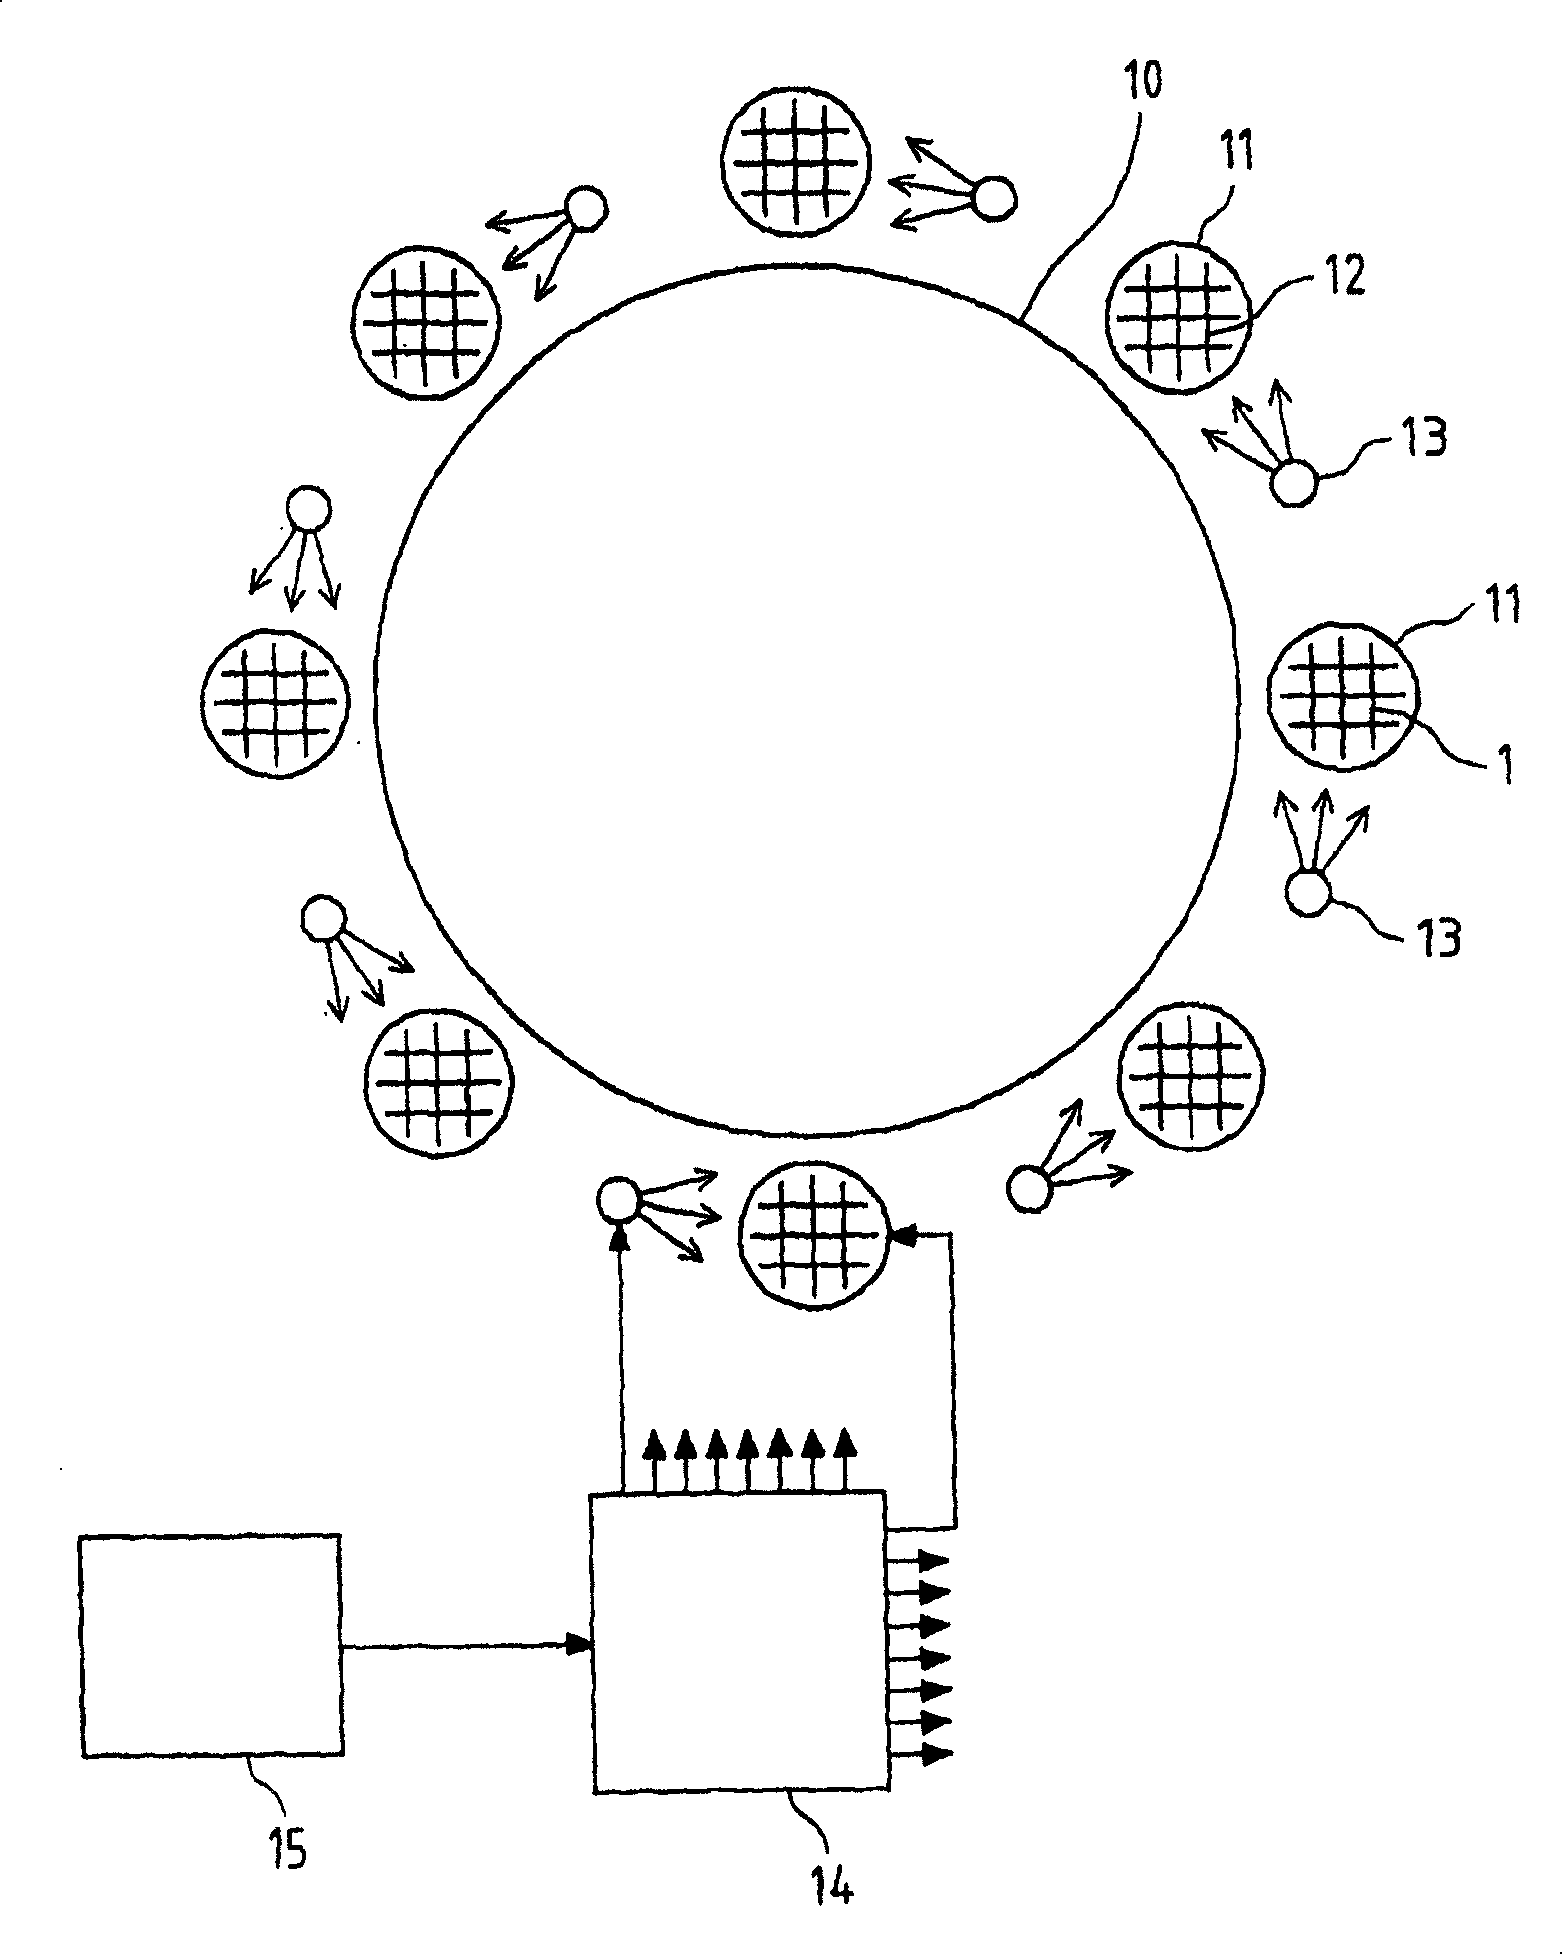 Method for supporting a propelled flying object during take-off and/or landing